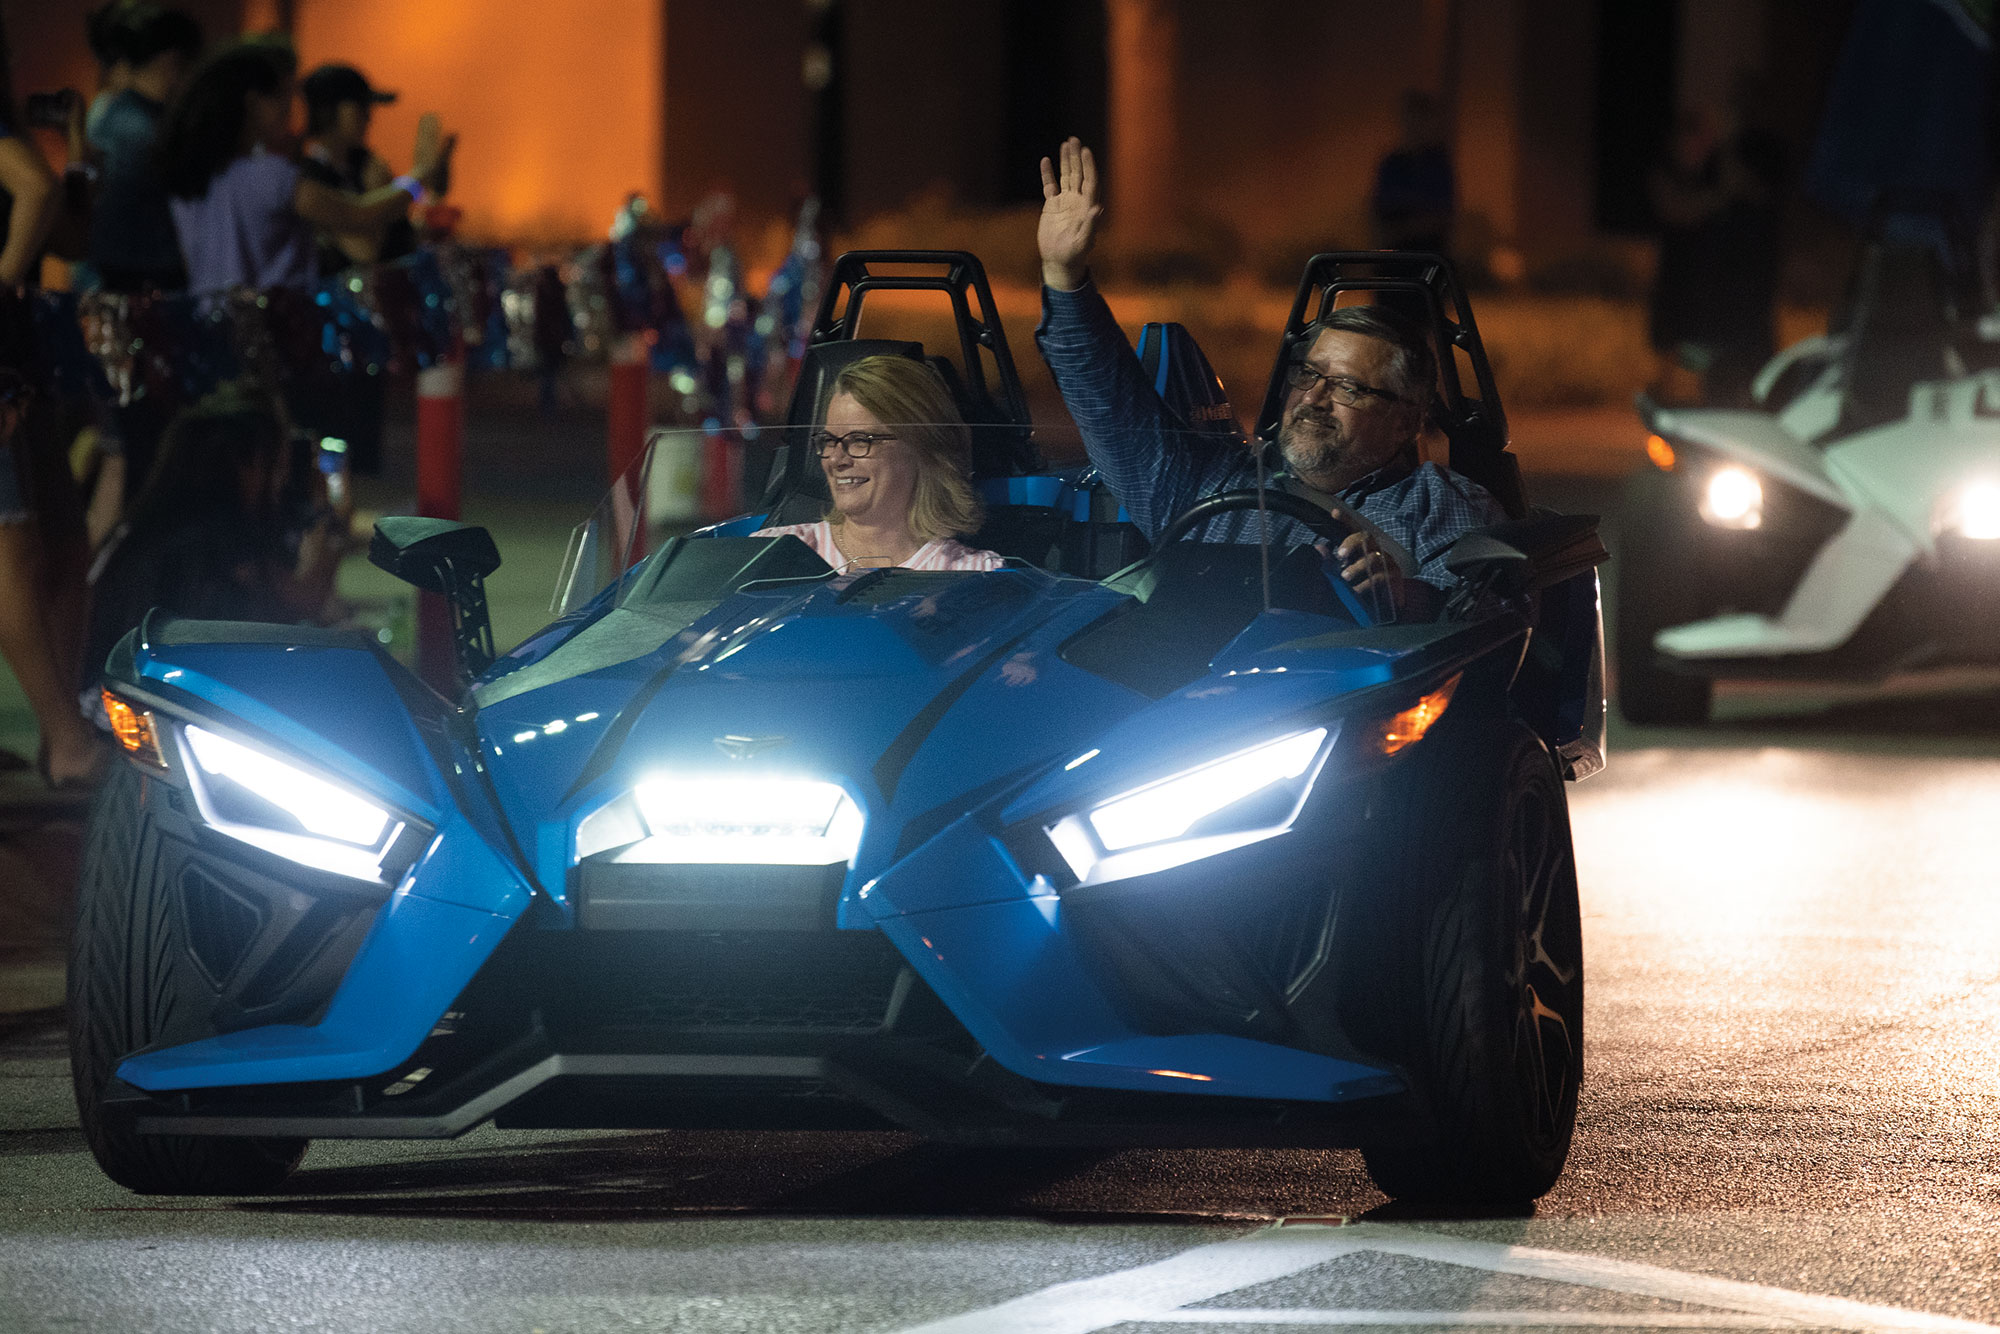 Dr. and Mrs. Shoemaker in a car in the 2021 Greek Rush Parade.